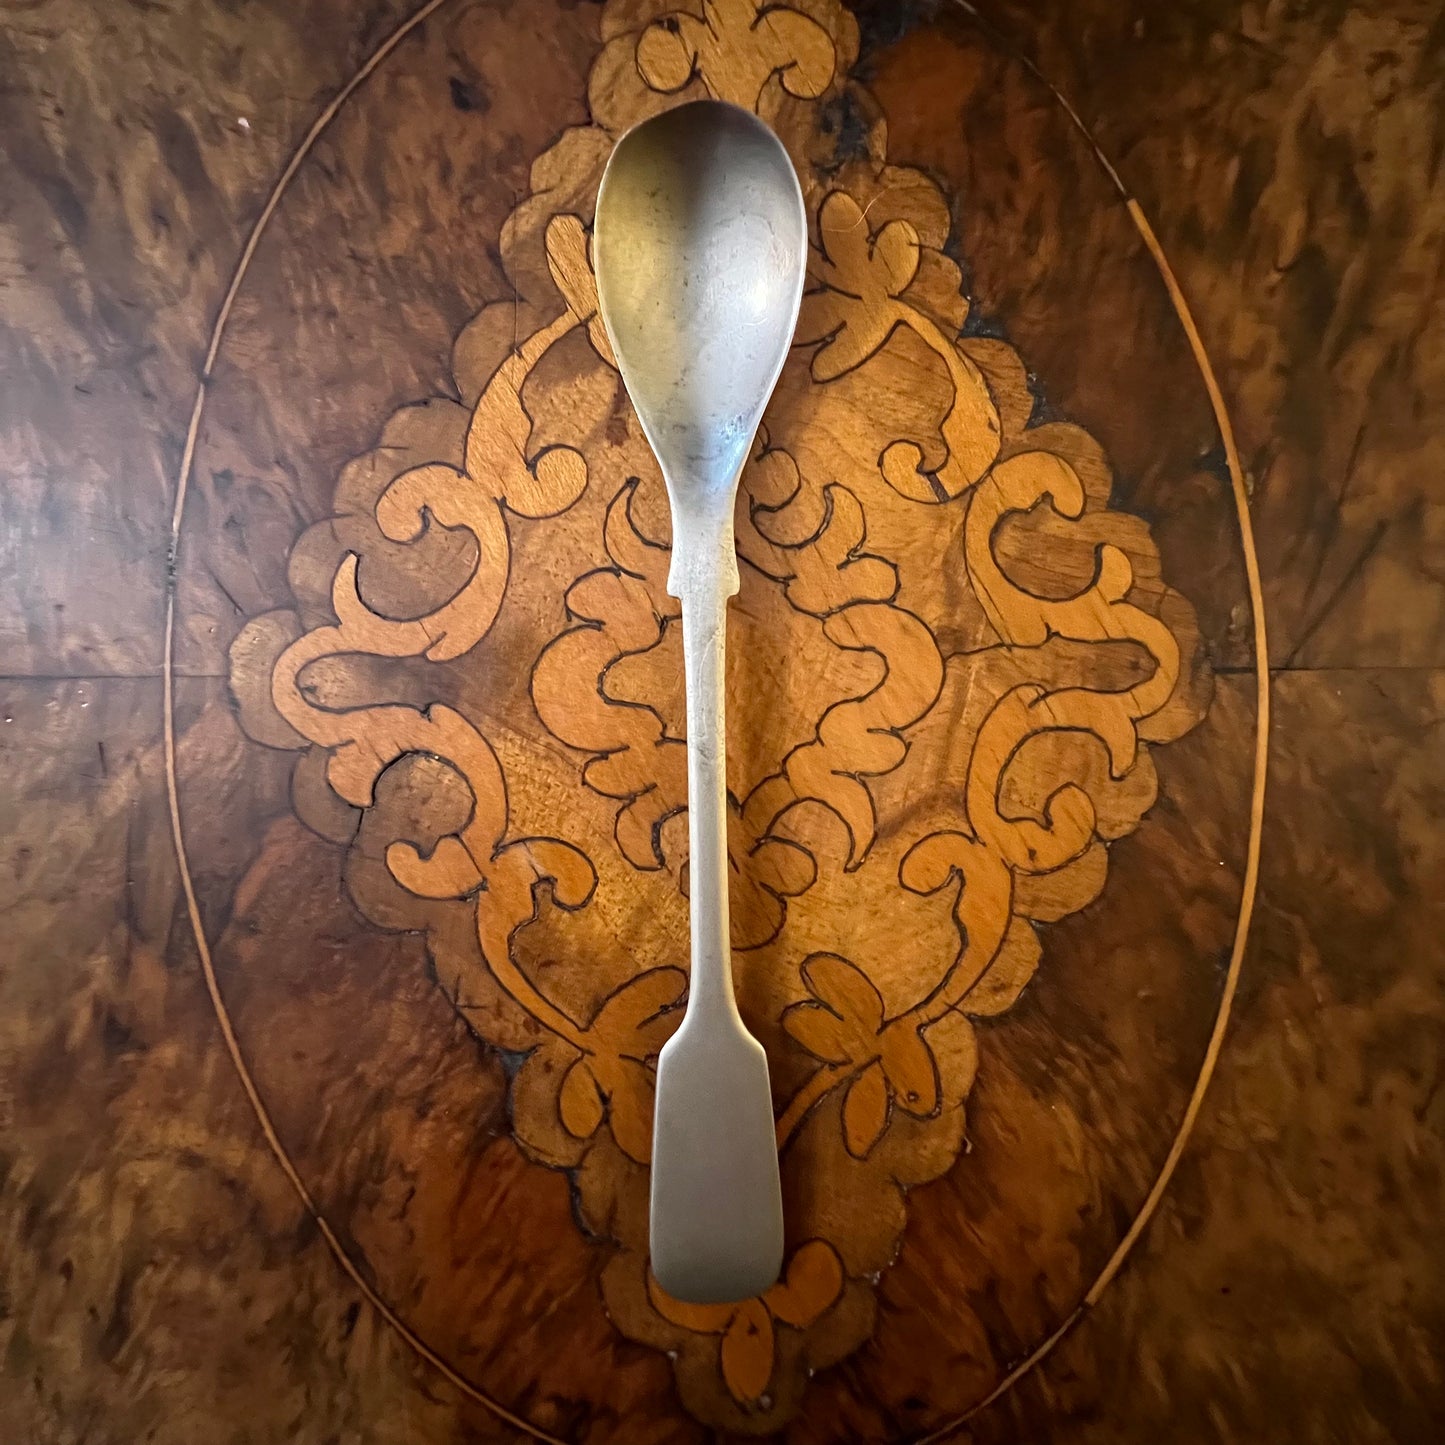 Vintage Silver Plated Spoon